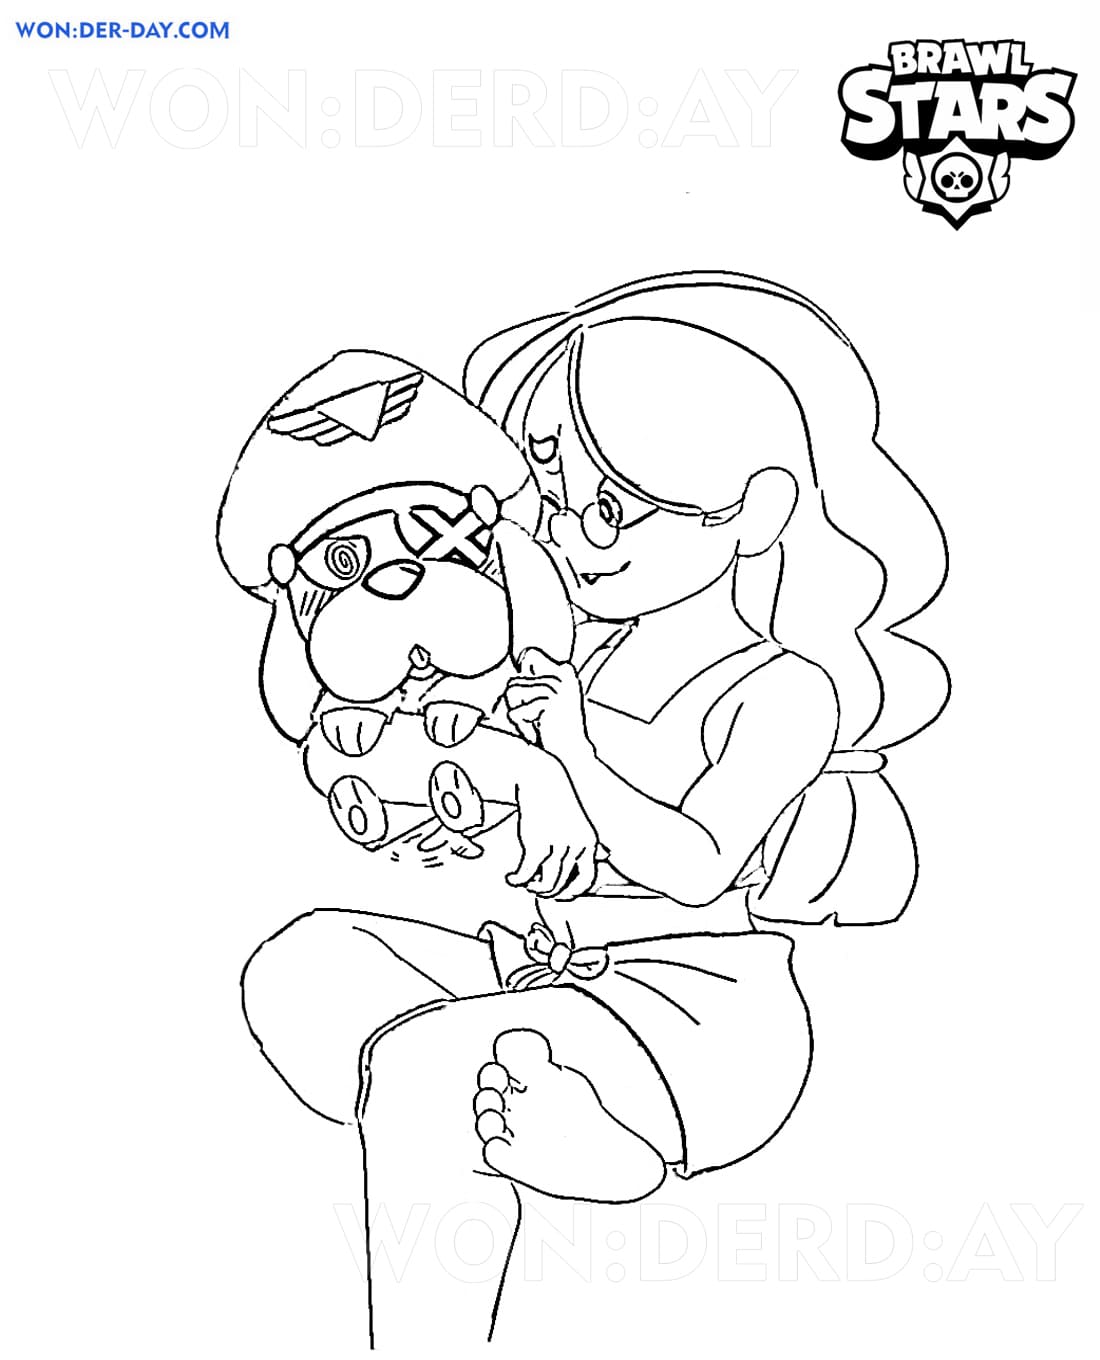 Colonel Ruffs Brawl Stars Coloring Pages 2021 Printable - brawl stars tekeningen kolonel ruffs